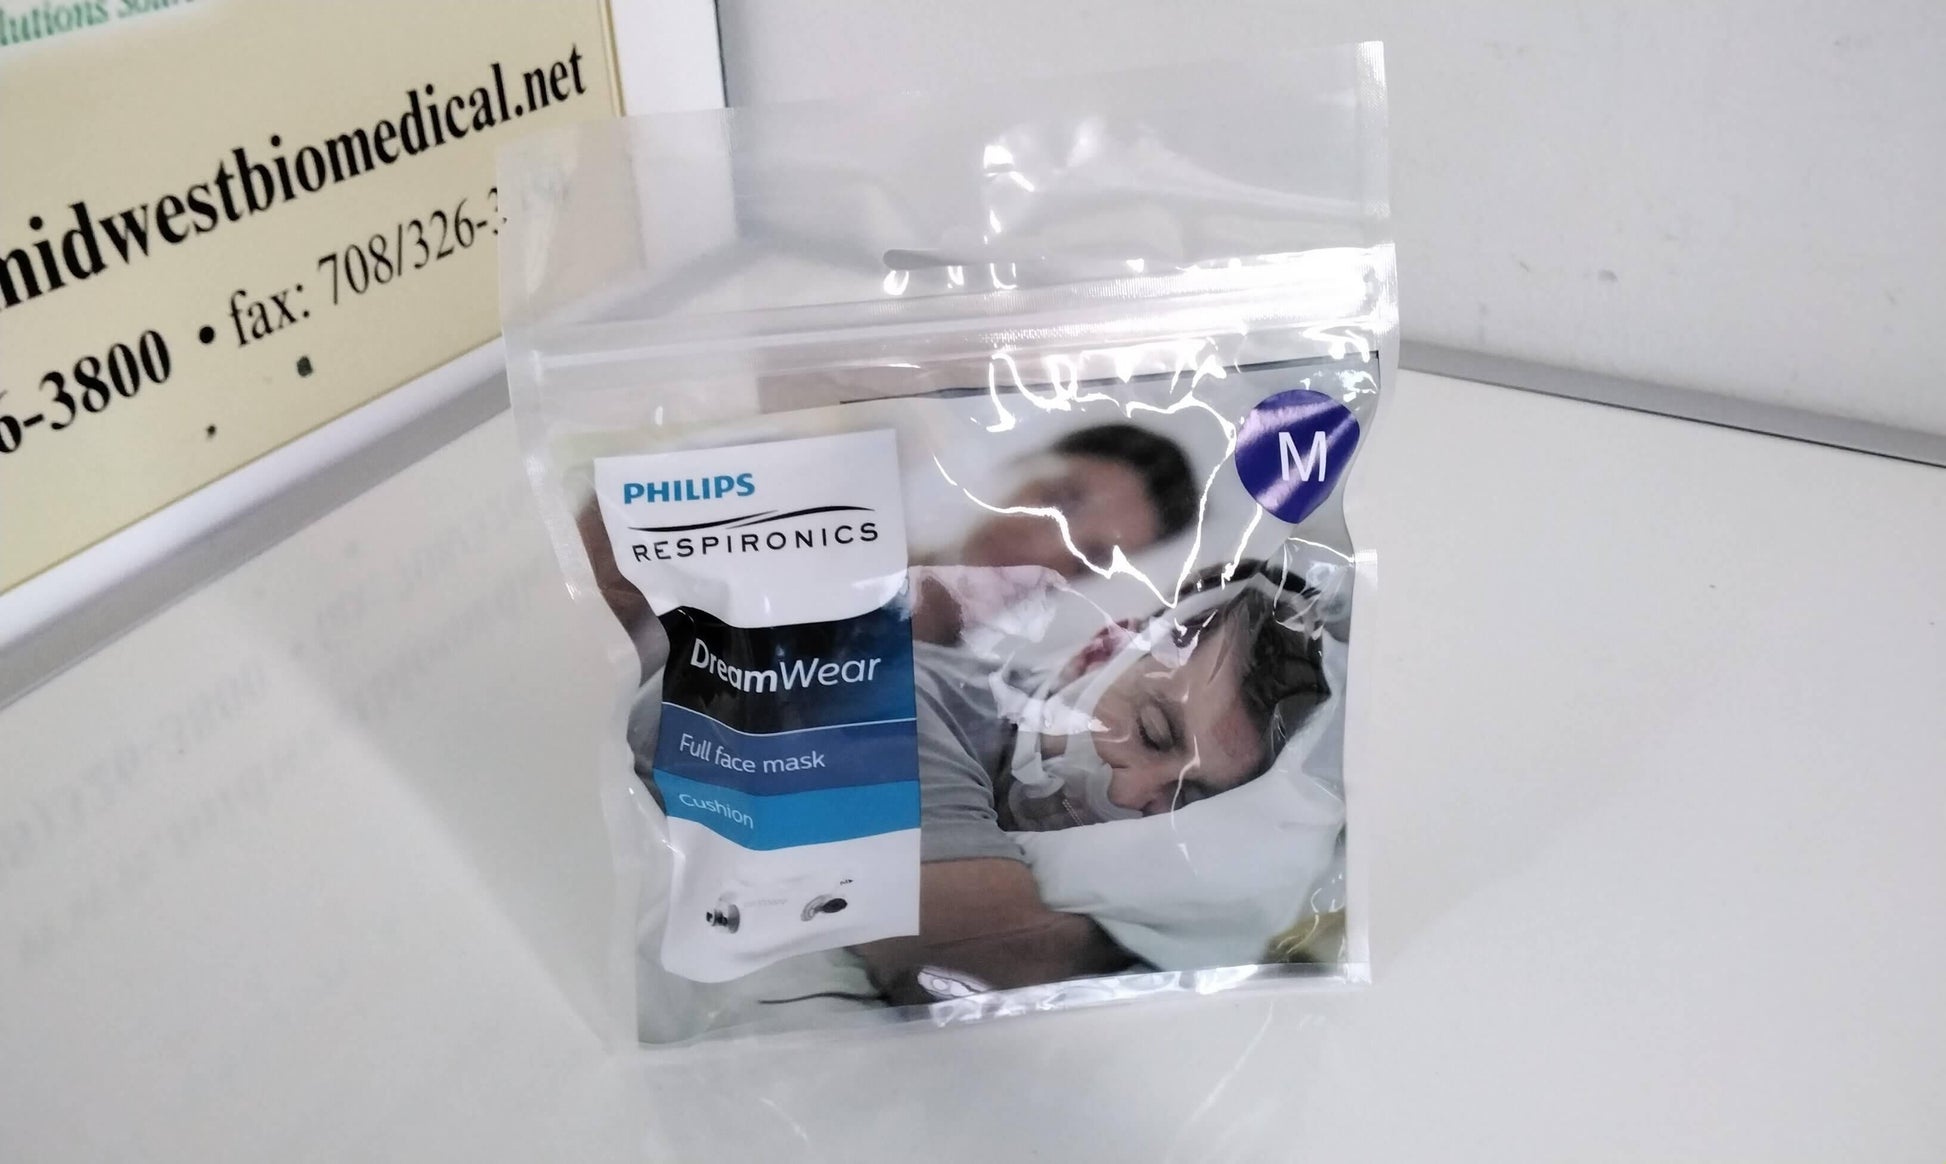 NEW Philips Respironics Replacement DreamWear Full Face Mask Cushion 1133431 with Free Shipping - MBR Medicals